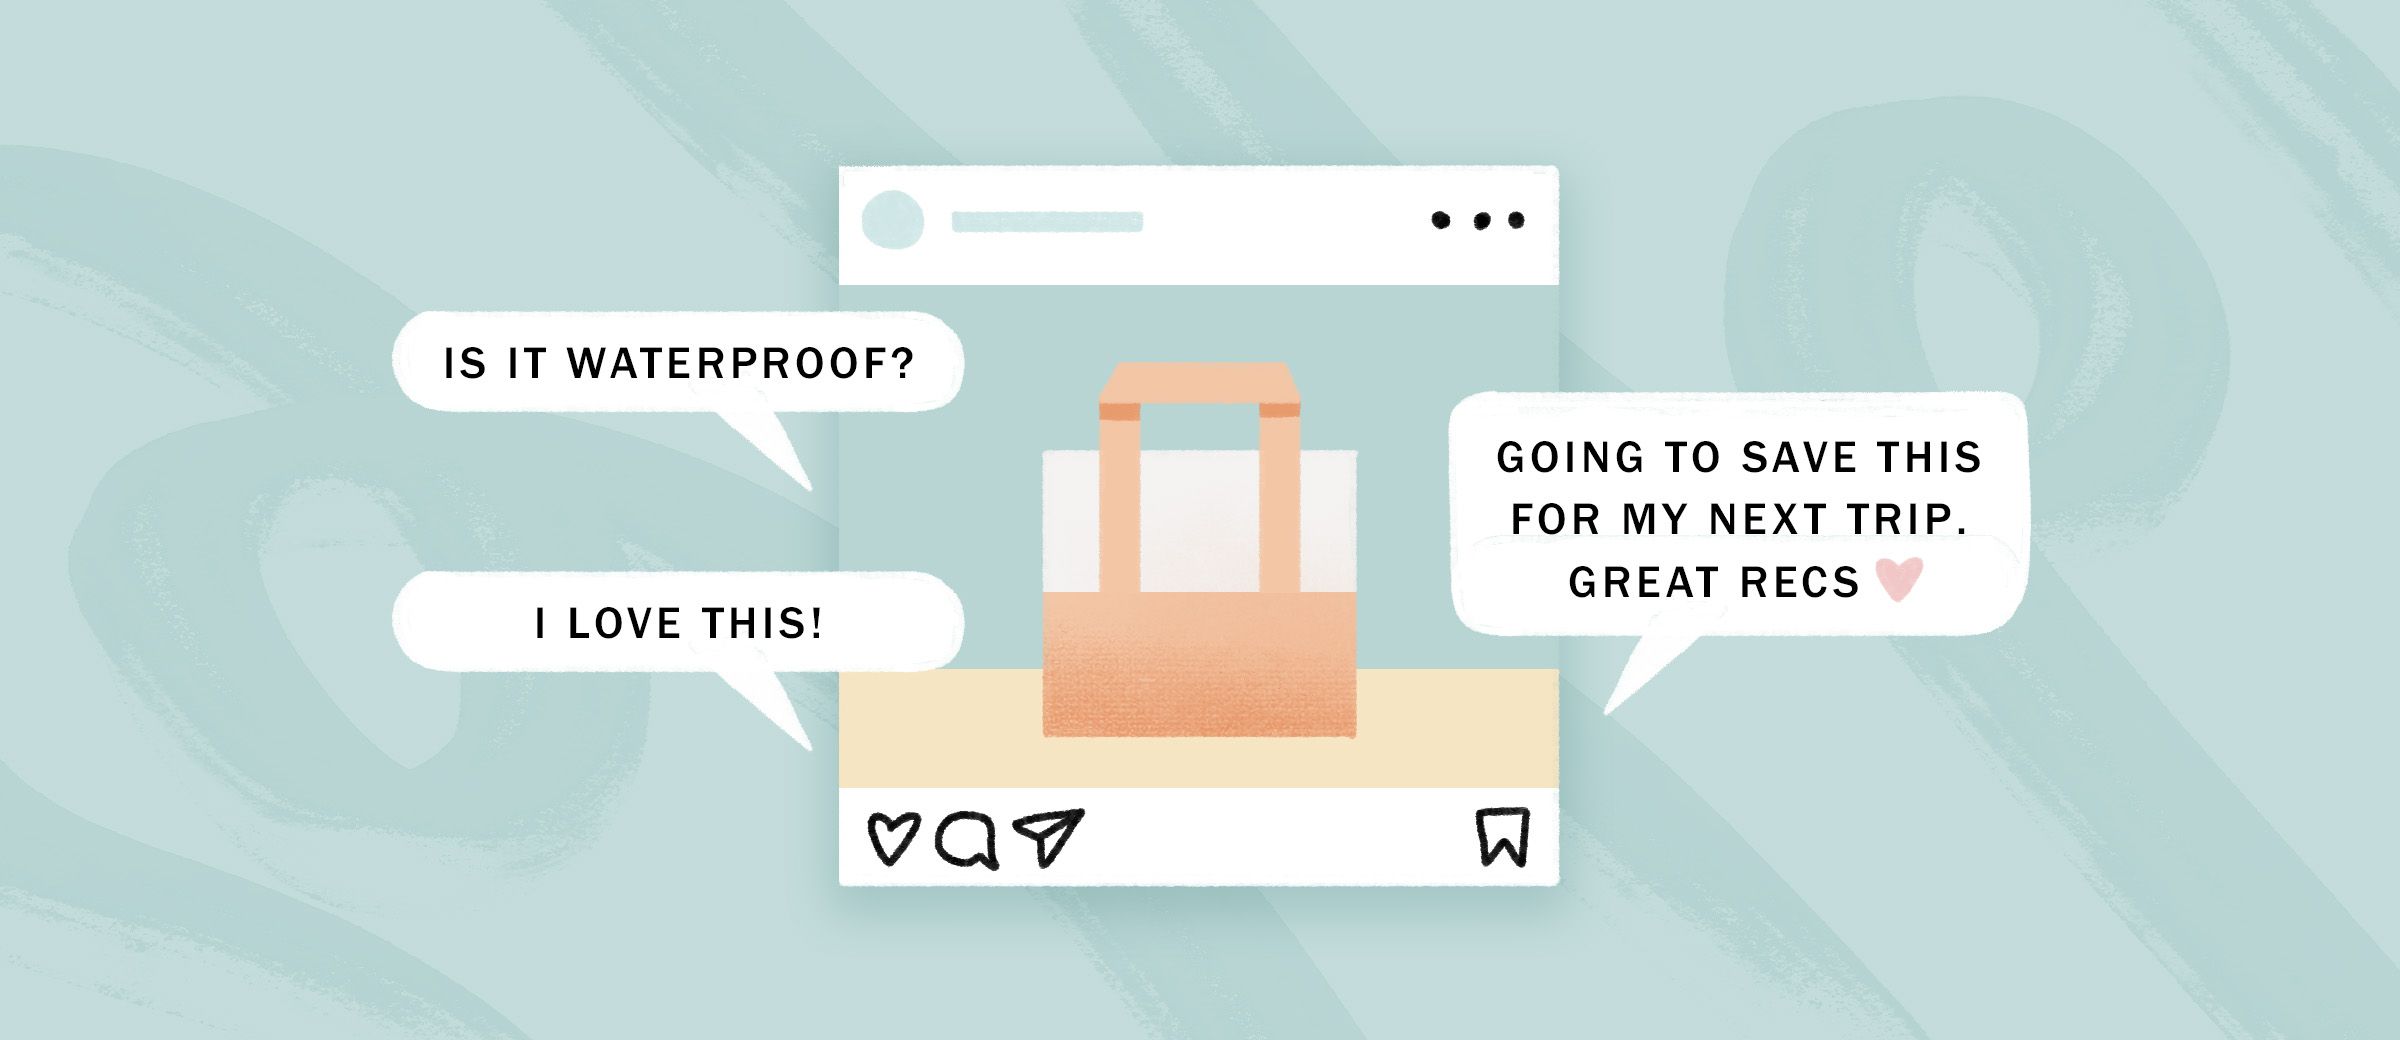 11 Tips on How to Get Engaged Followers on Instagram, by megan-martinez